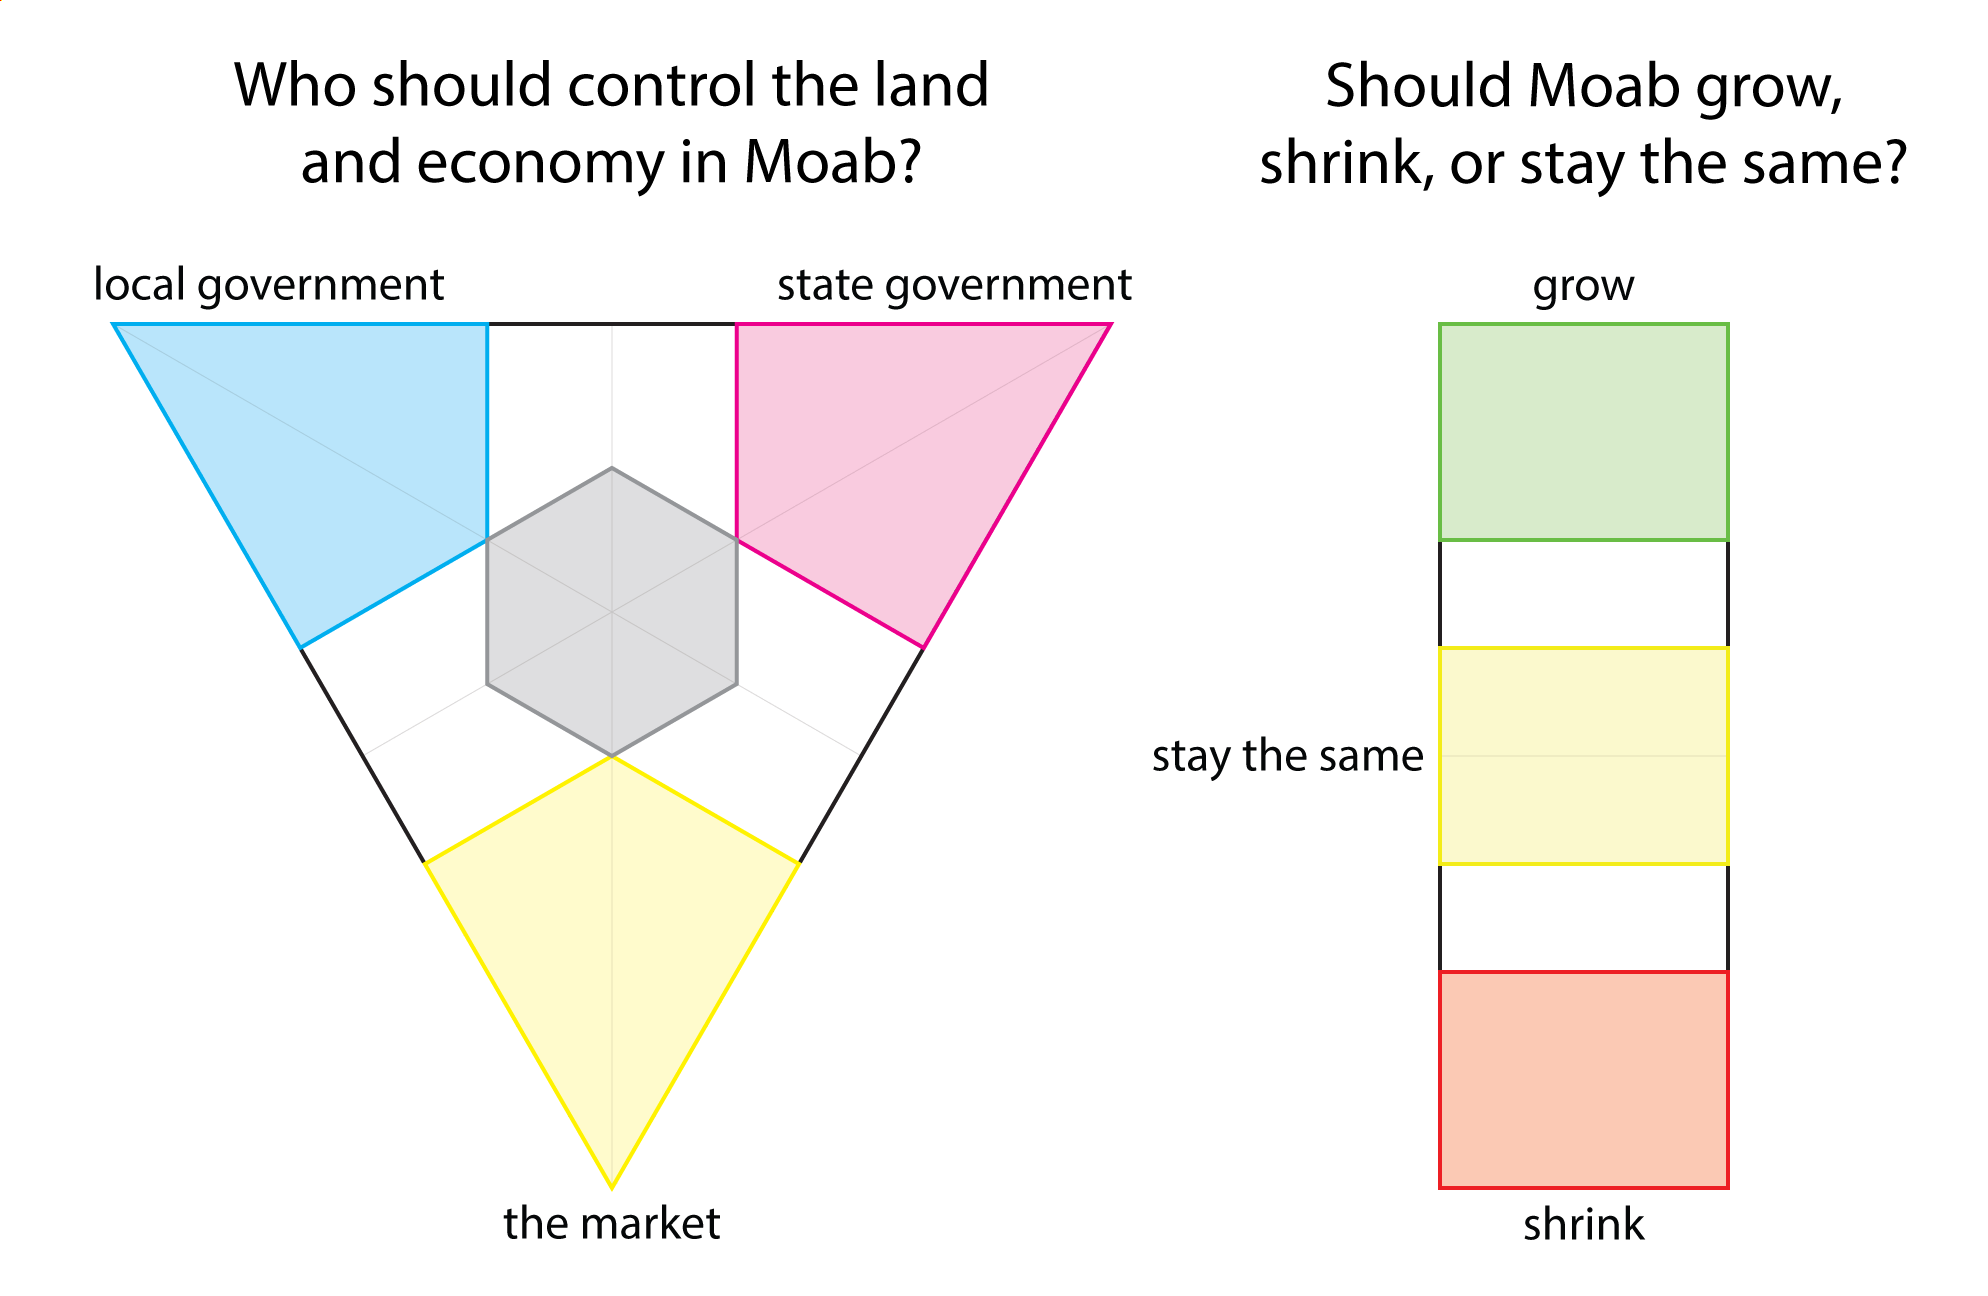 A political compass with two measures: Who should control the land and economy in Moab (local government, state government, or the market) and should Moab grow, shrink, or stay the same?